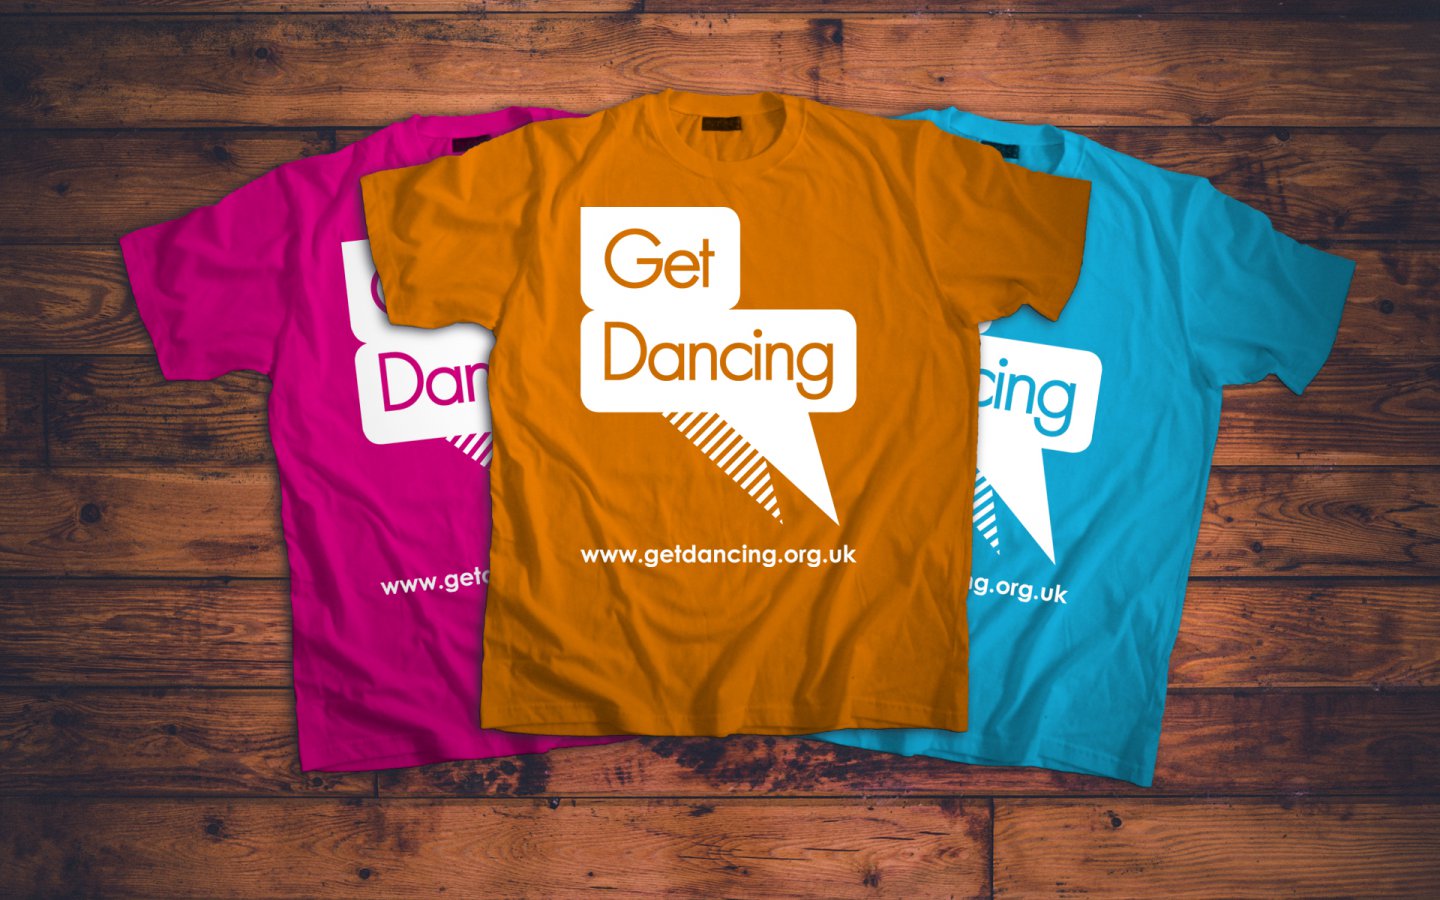 Get Dancing, Logo Design White on Brand Colour T-Shirts